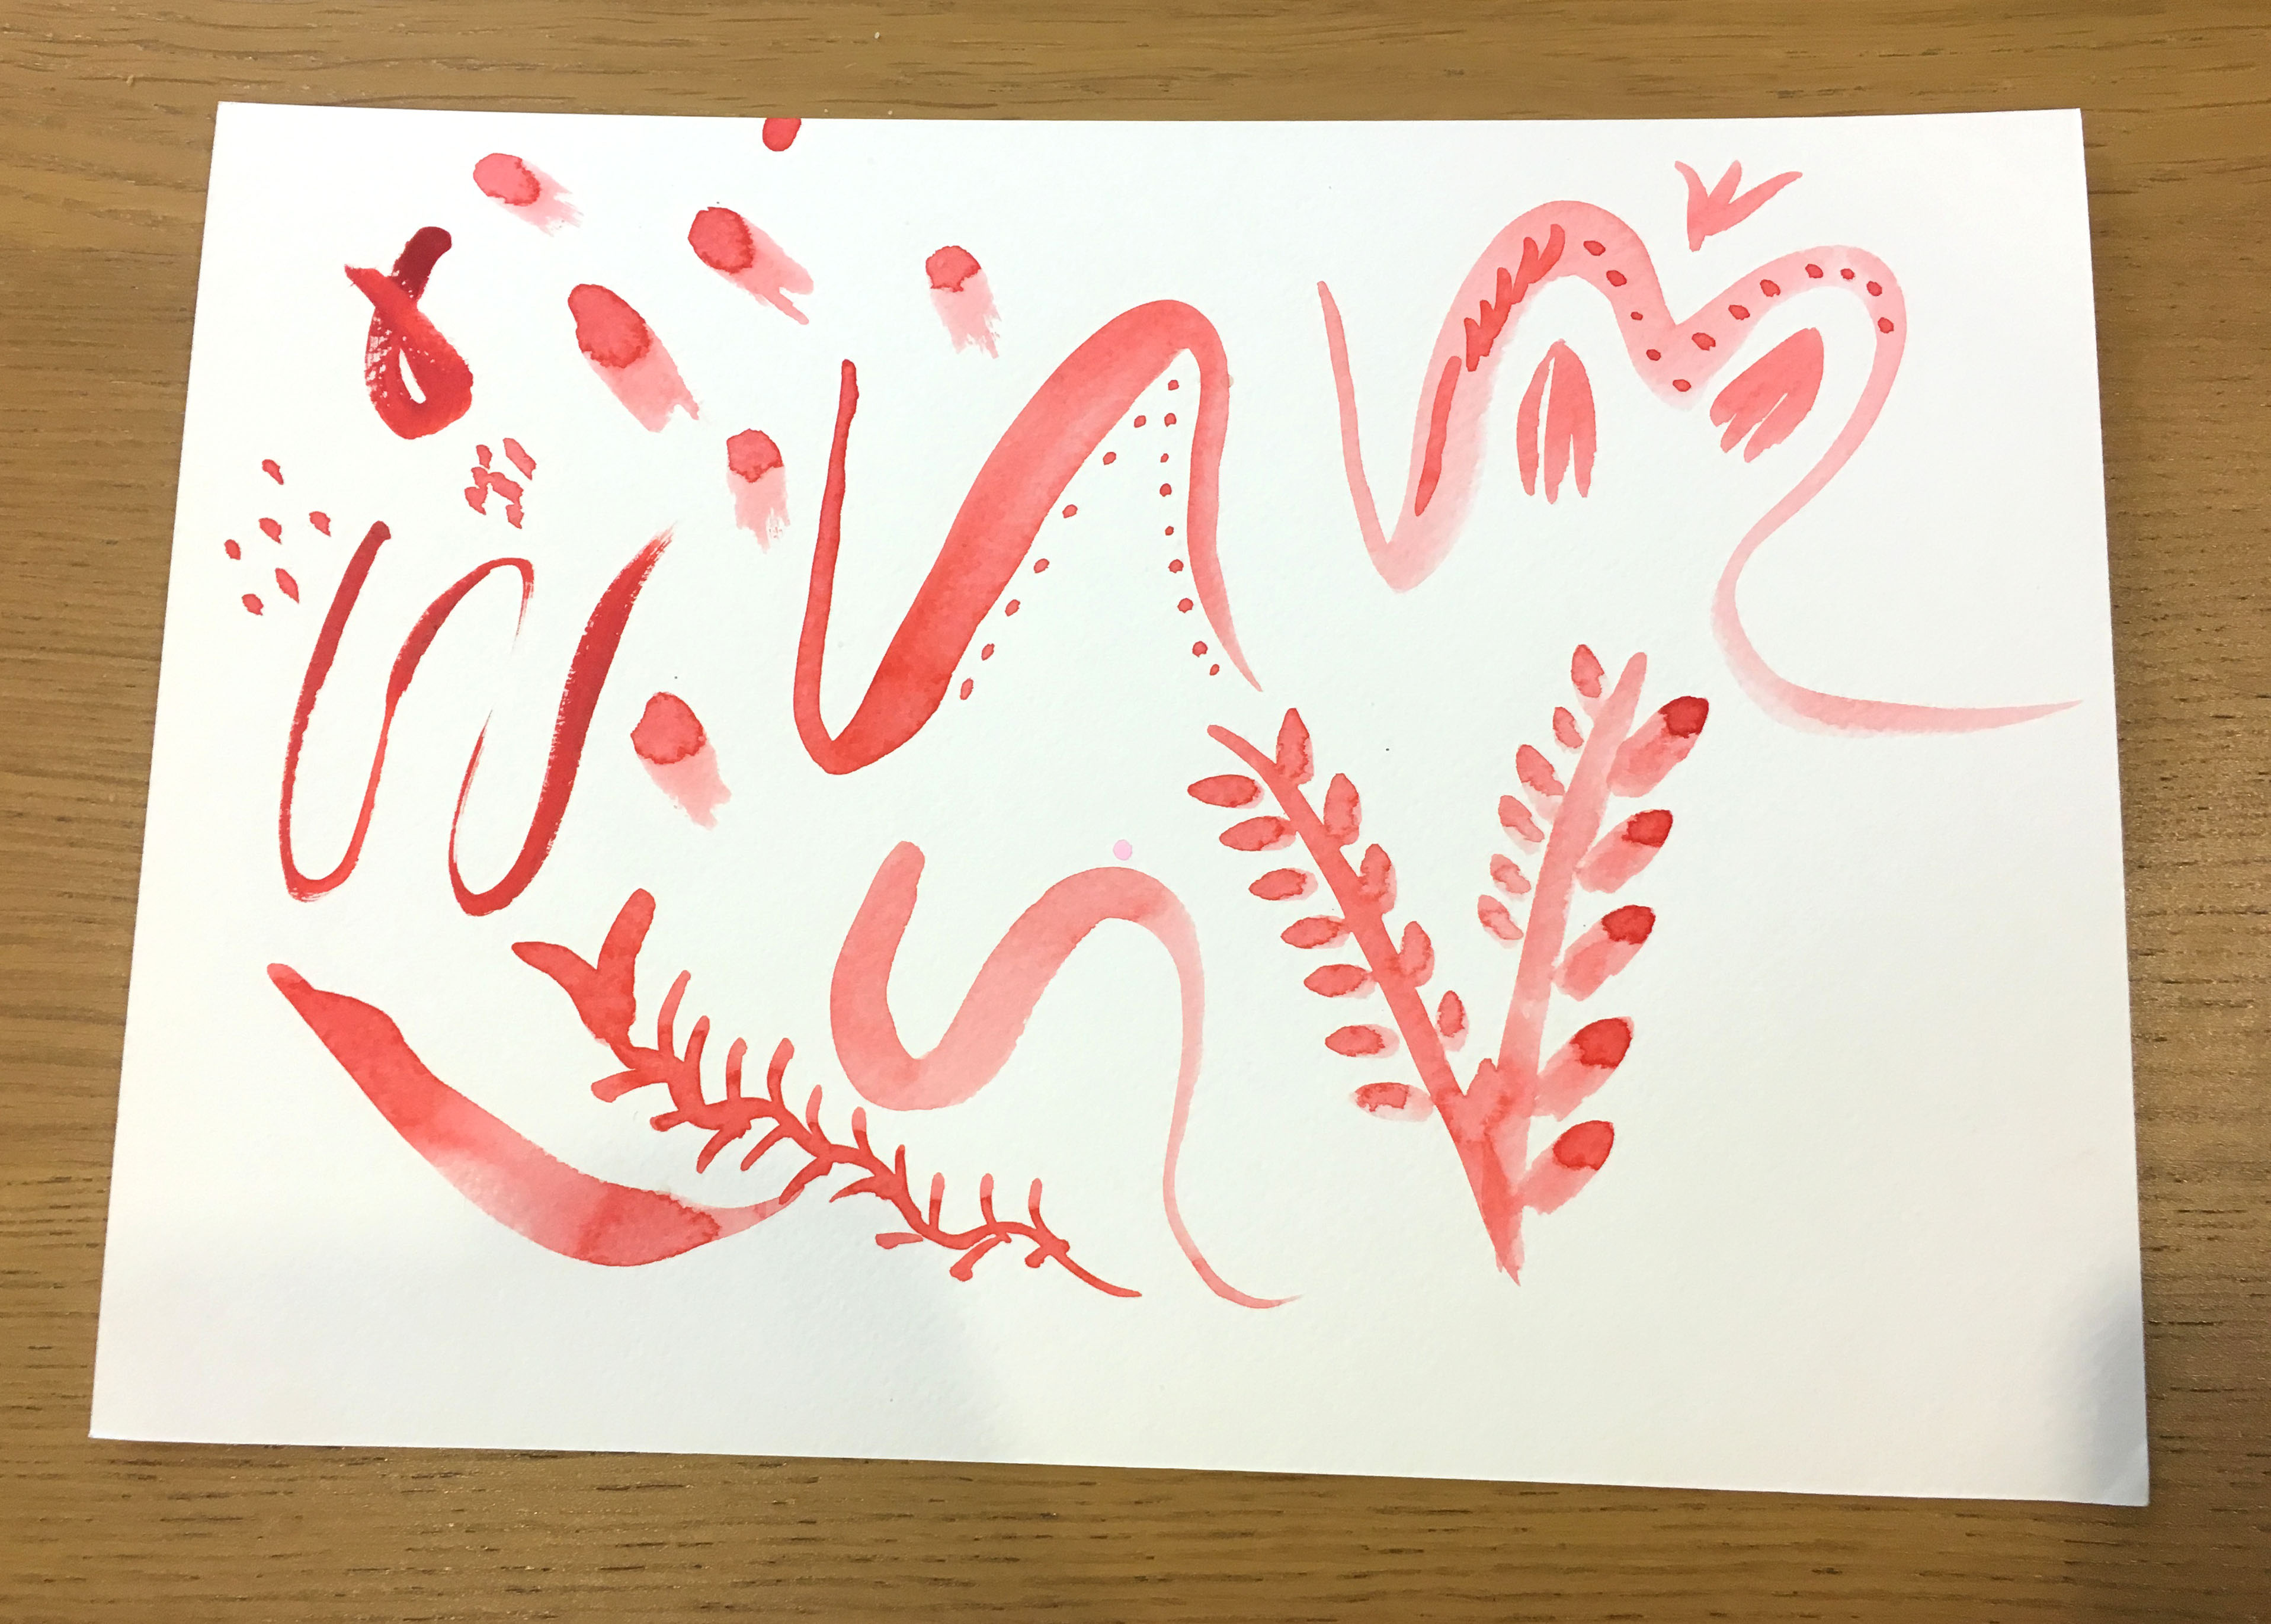 Watercolour practice paper with red doodles on.